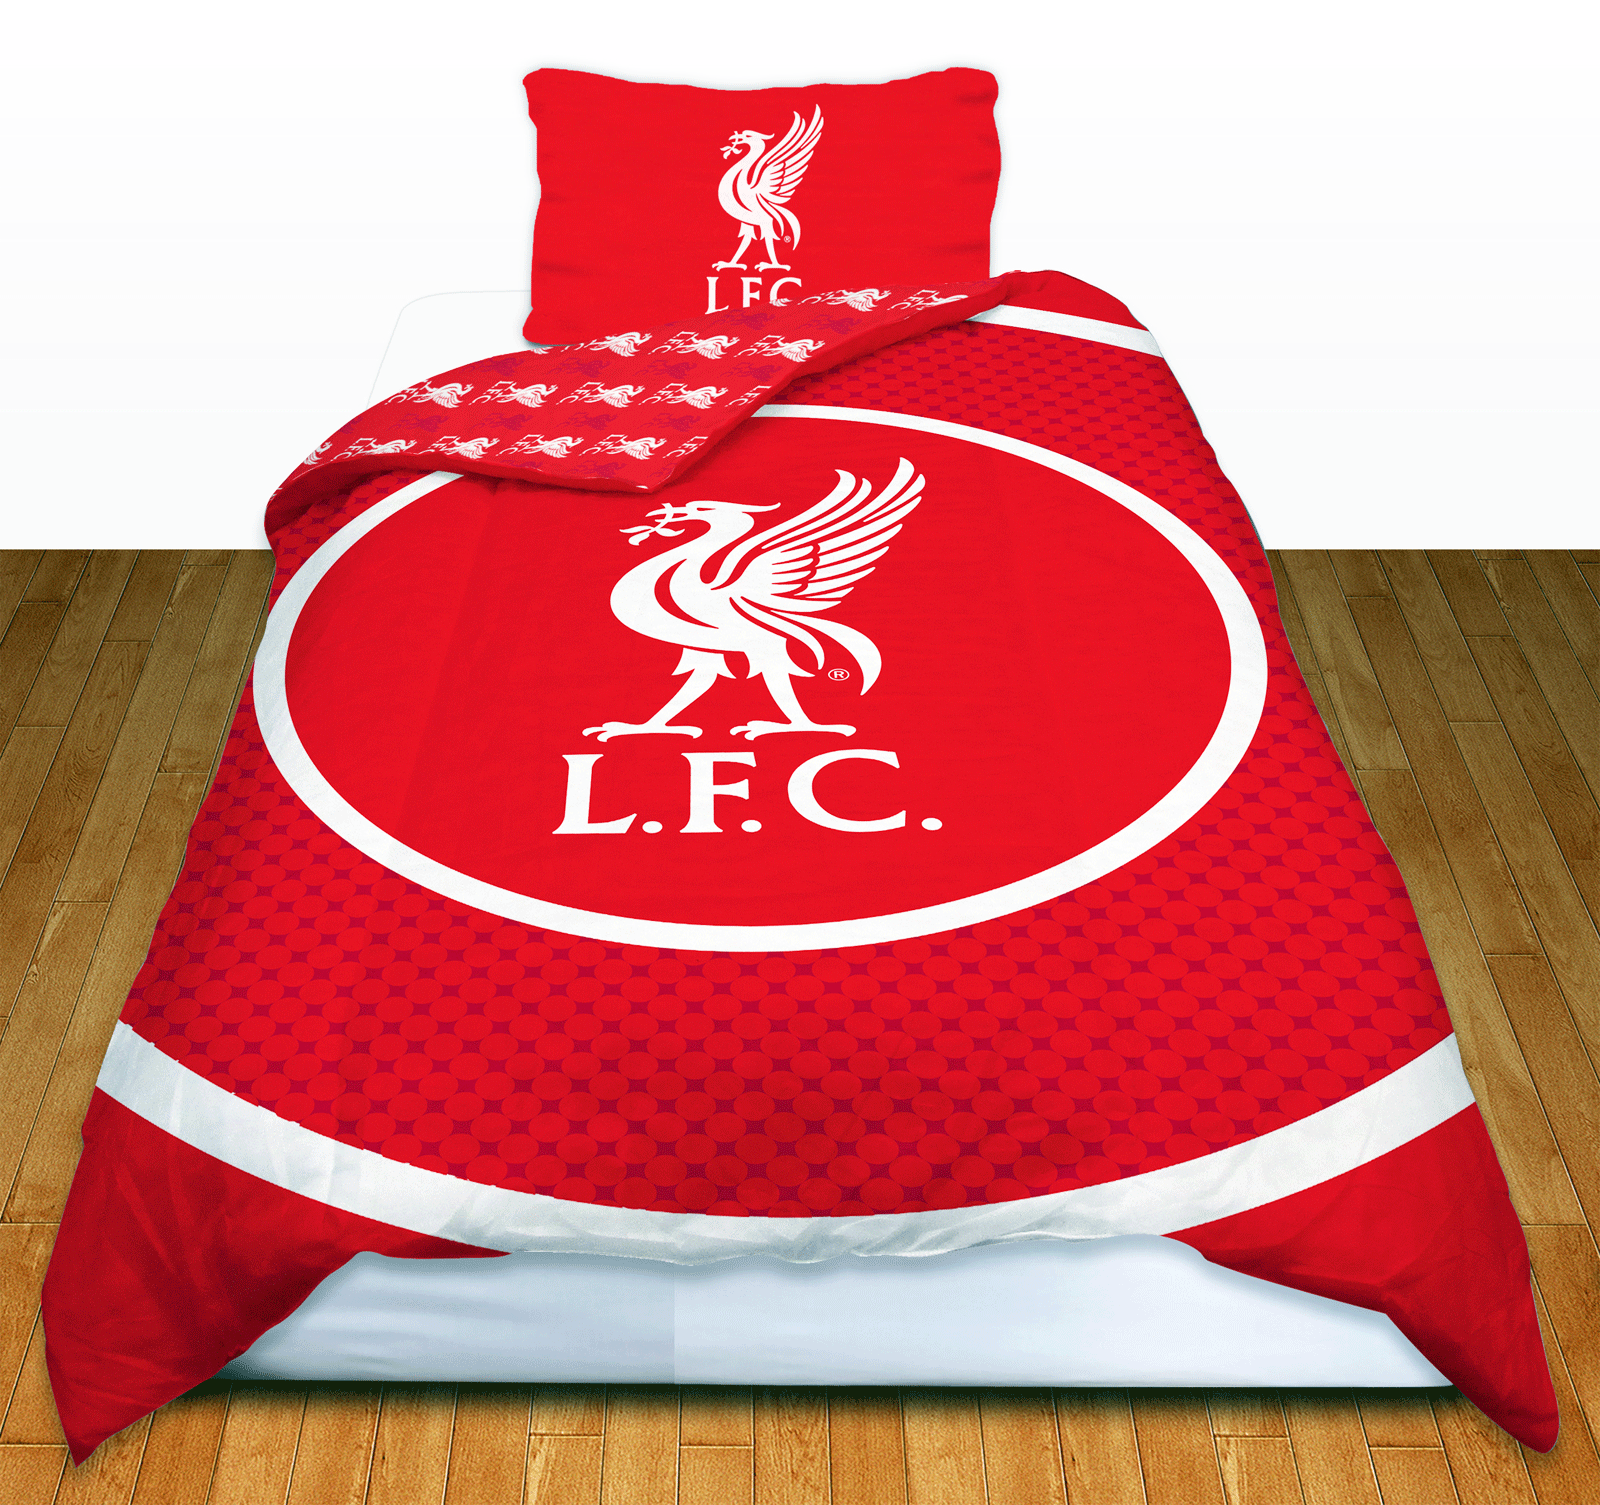 OFFICIAL LIVERPOOL FOOTBALL CLUB SINGLE DUVET BEDDING SETS - CHOICE OF ...